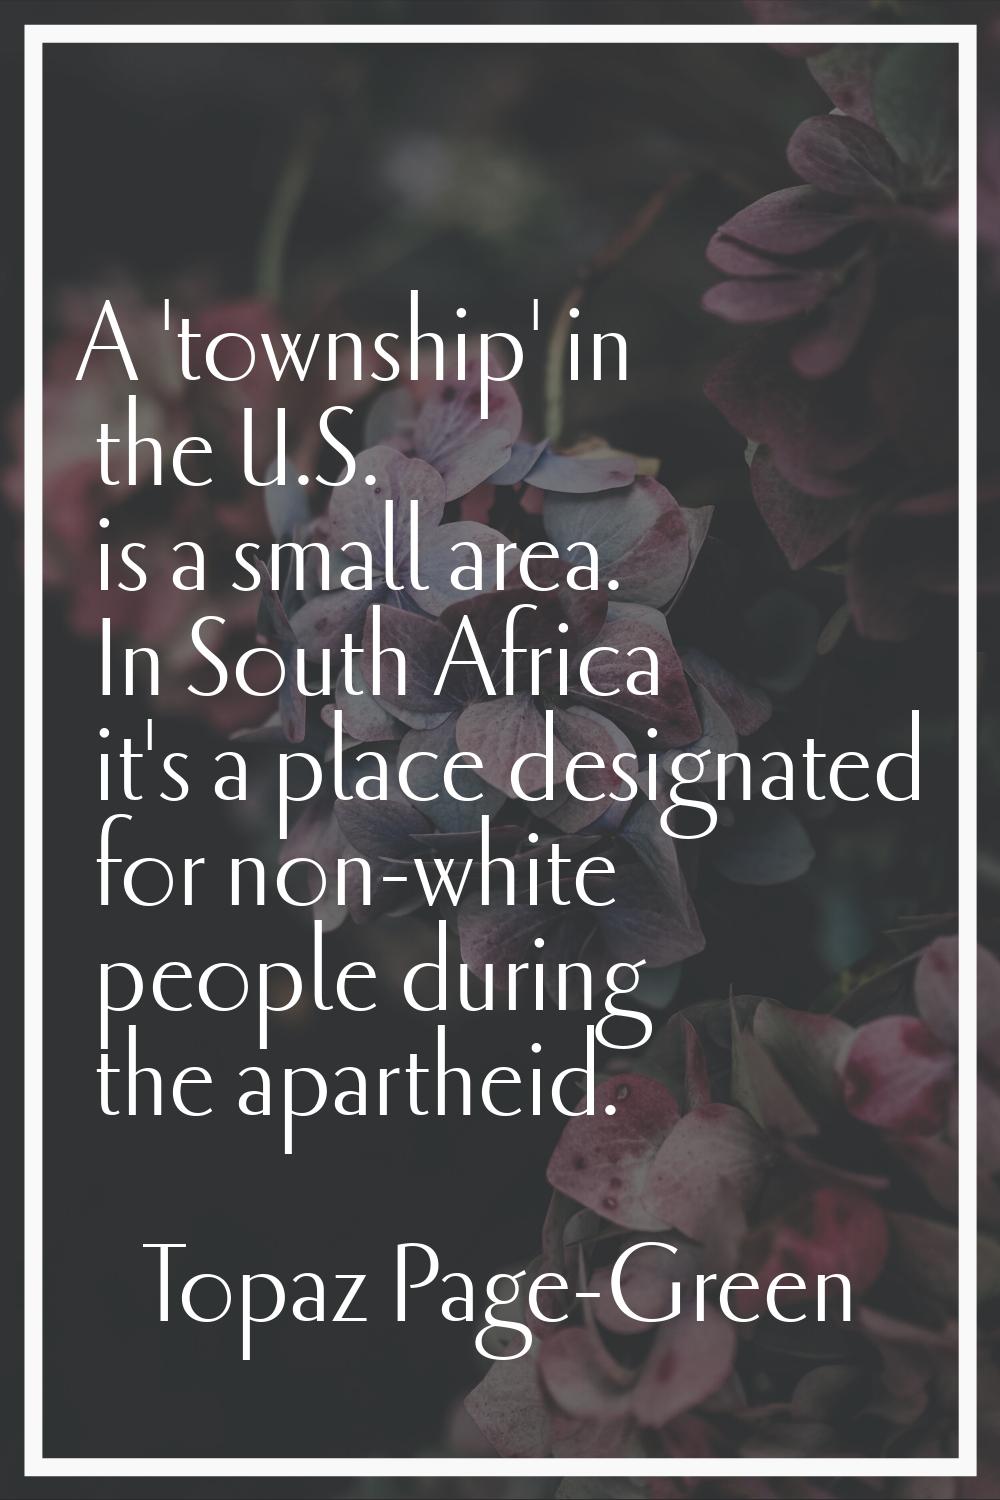 A 'township' in the U.S. is a small area. In South Africa it's a place designated for non-white peo